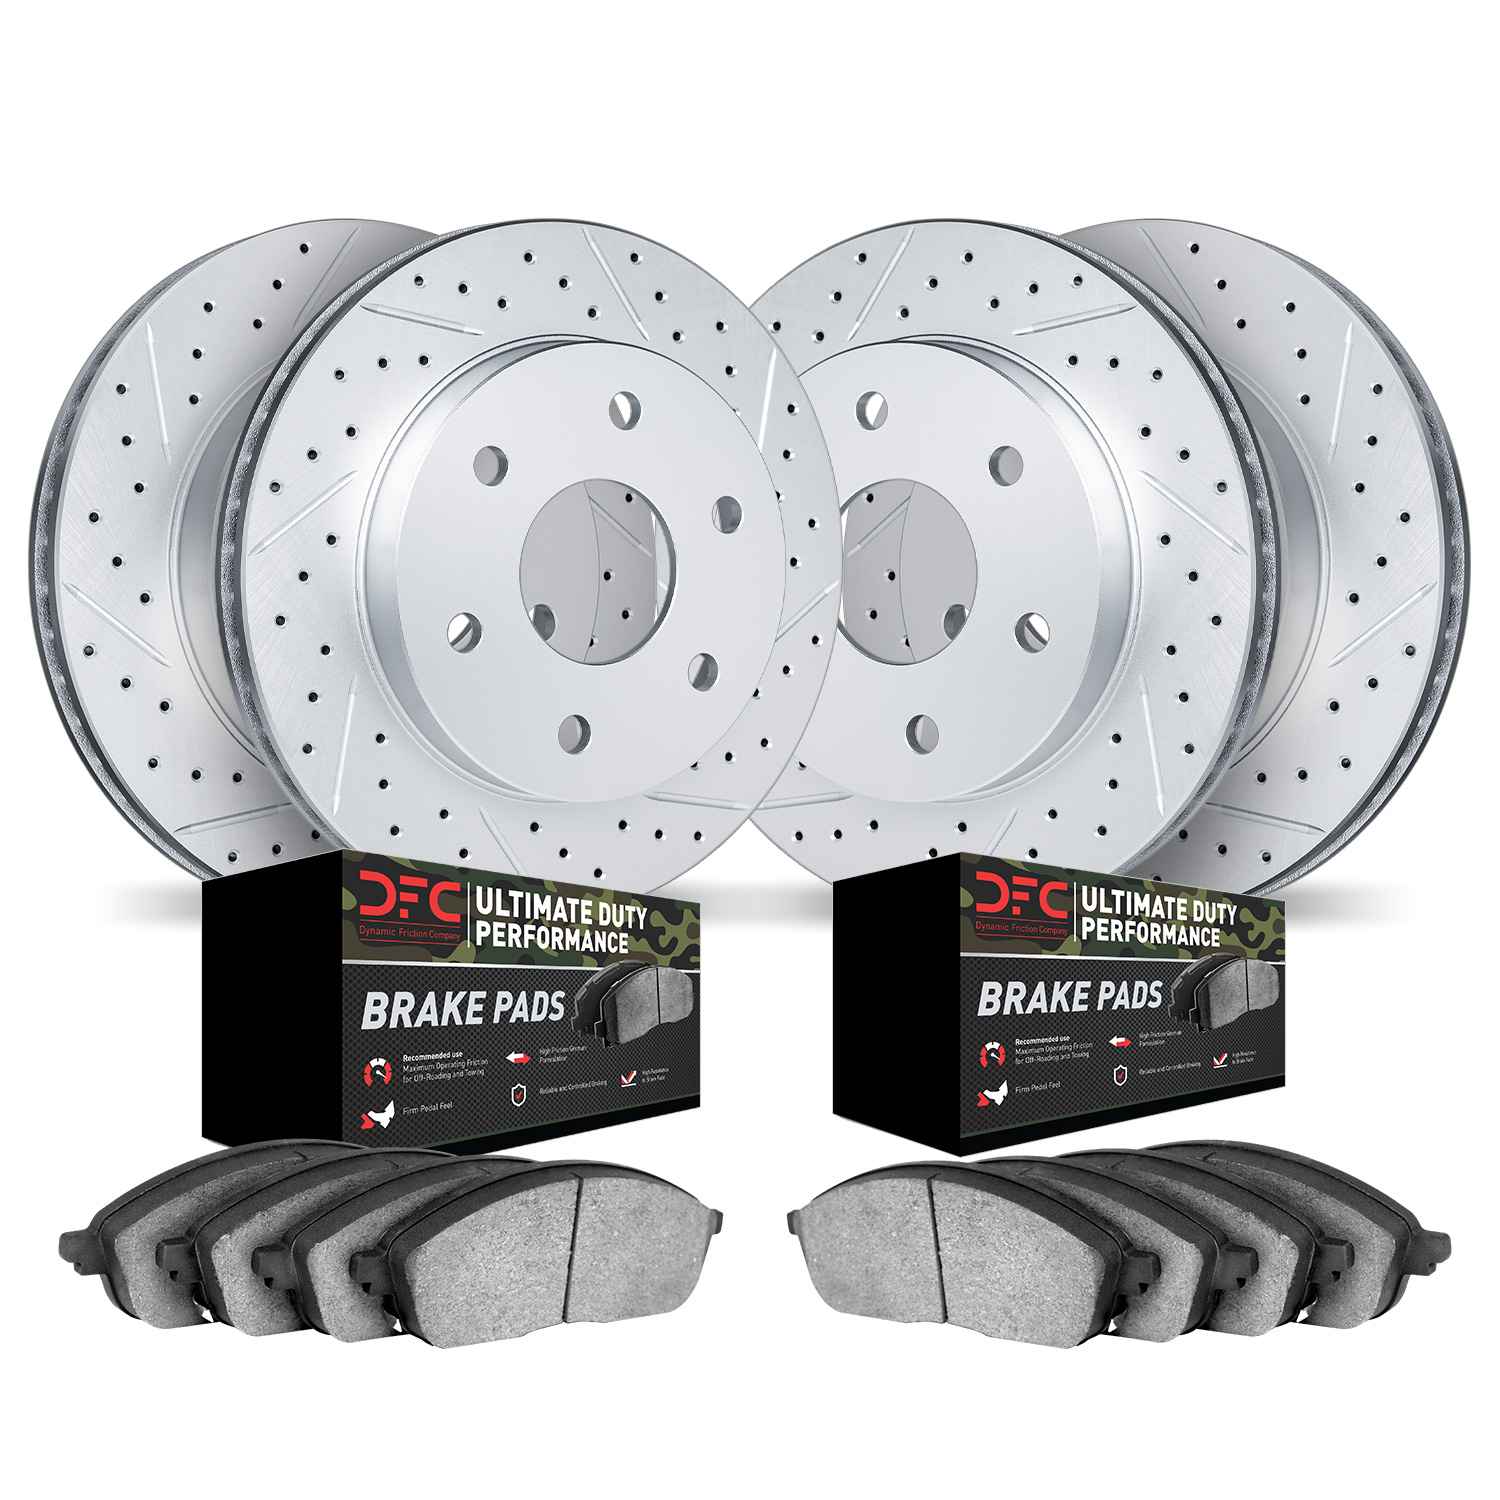 2404-67007 Geoperformance Drilled/Slotted Brake Rotors with Ultimate-Duty Brake Pads Kit, Fits Select Infiniti/Nissan, Position: